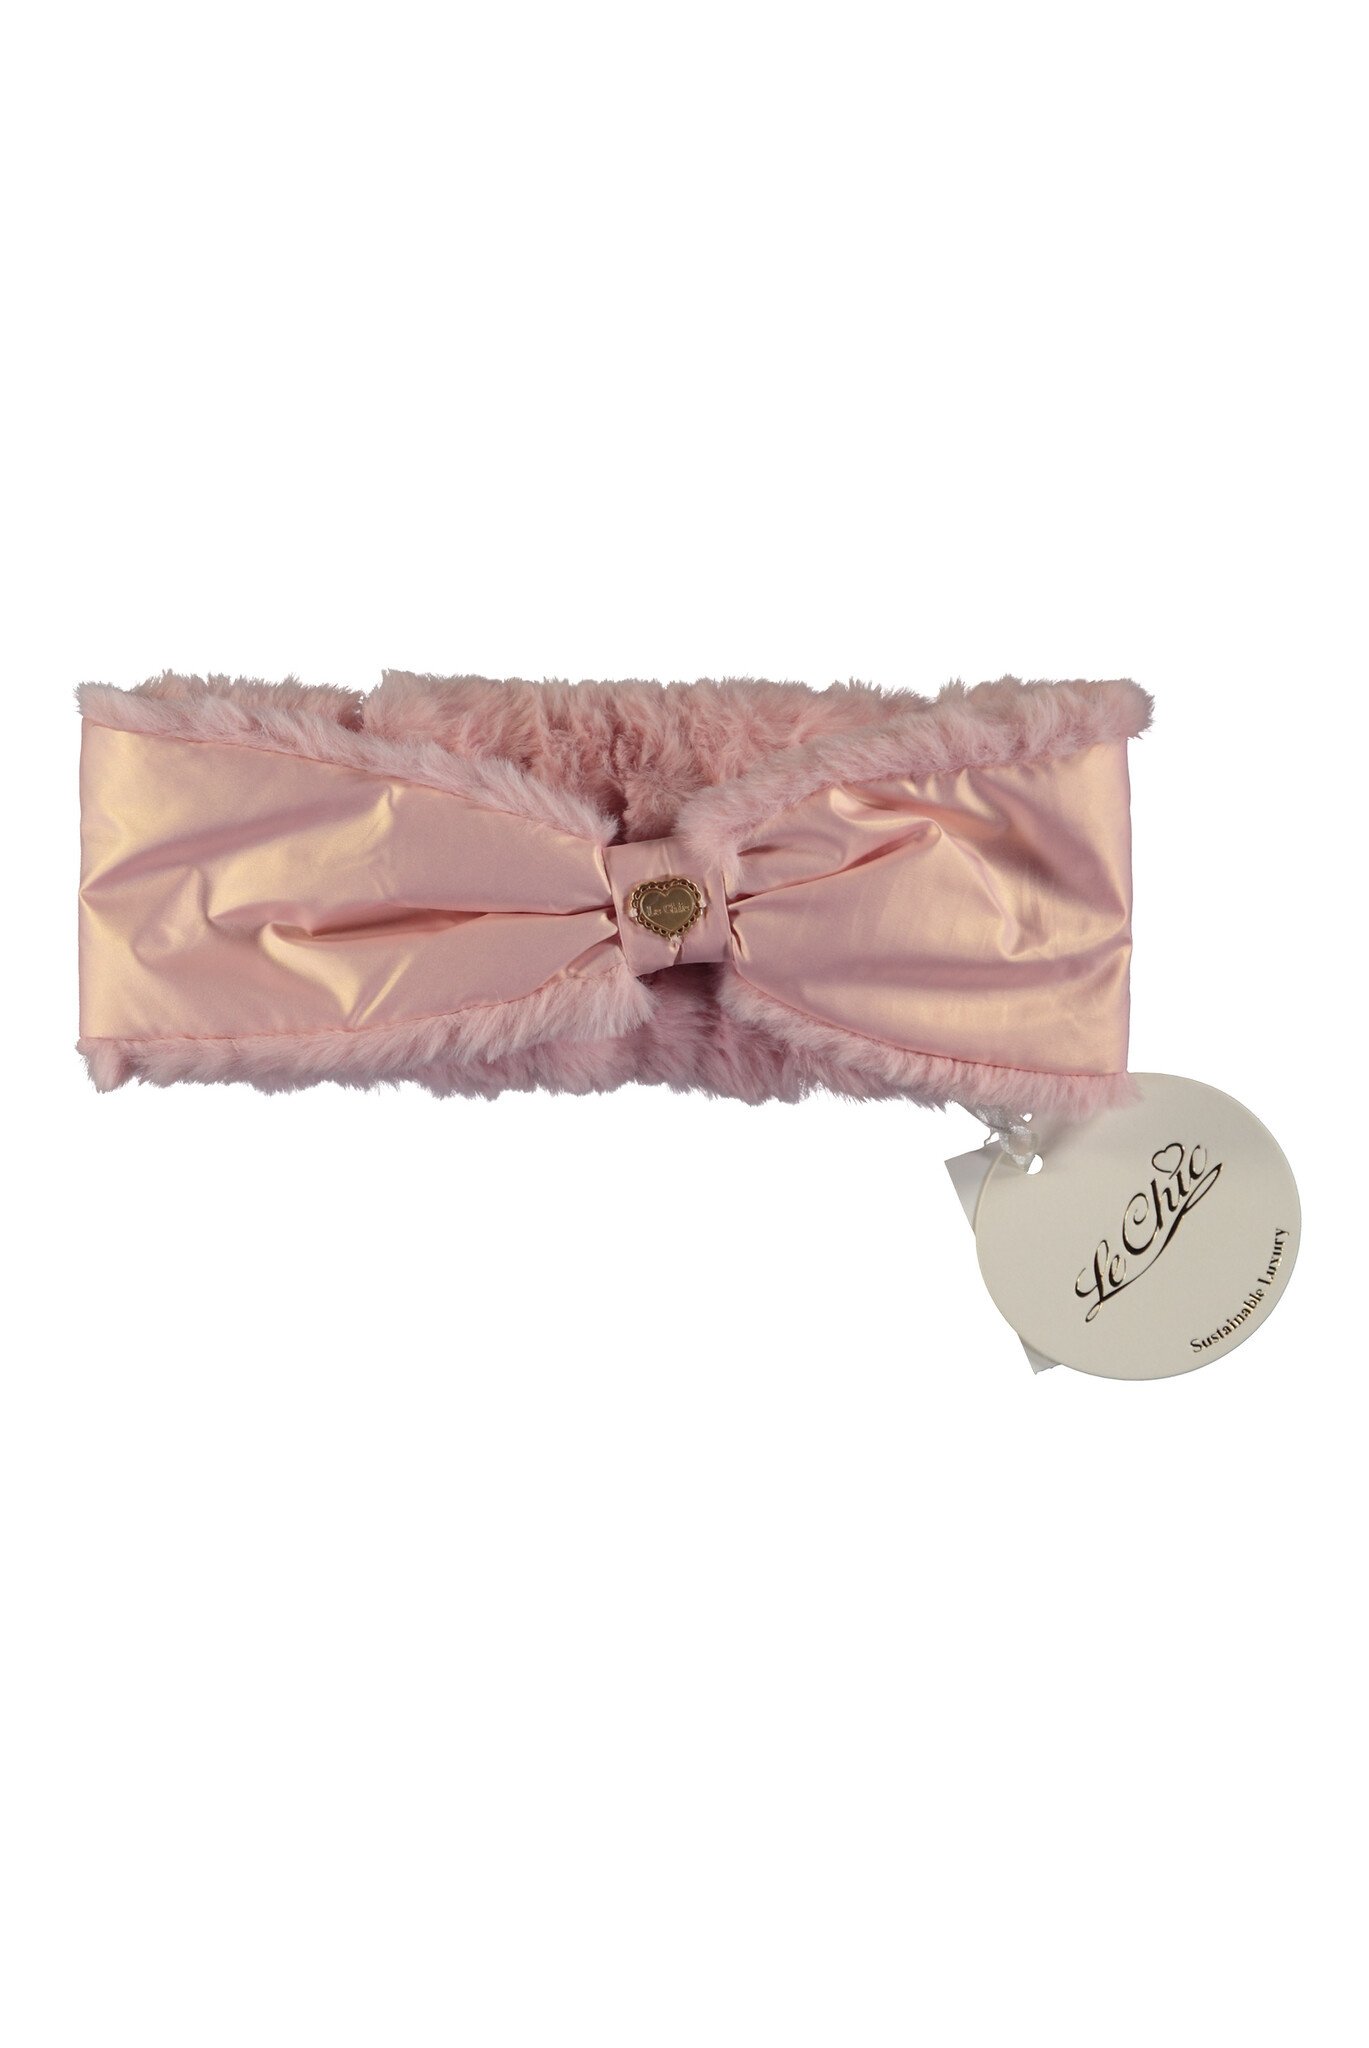 Le Chic Meisjes haarband - Rue - Cotton candy